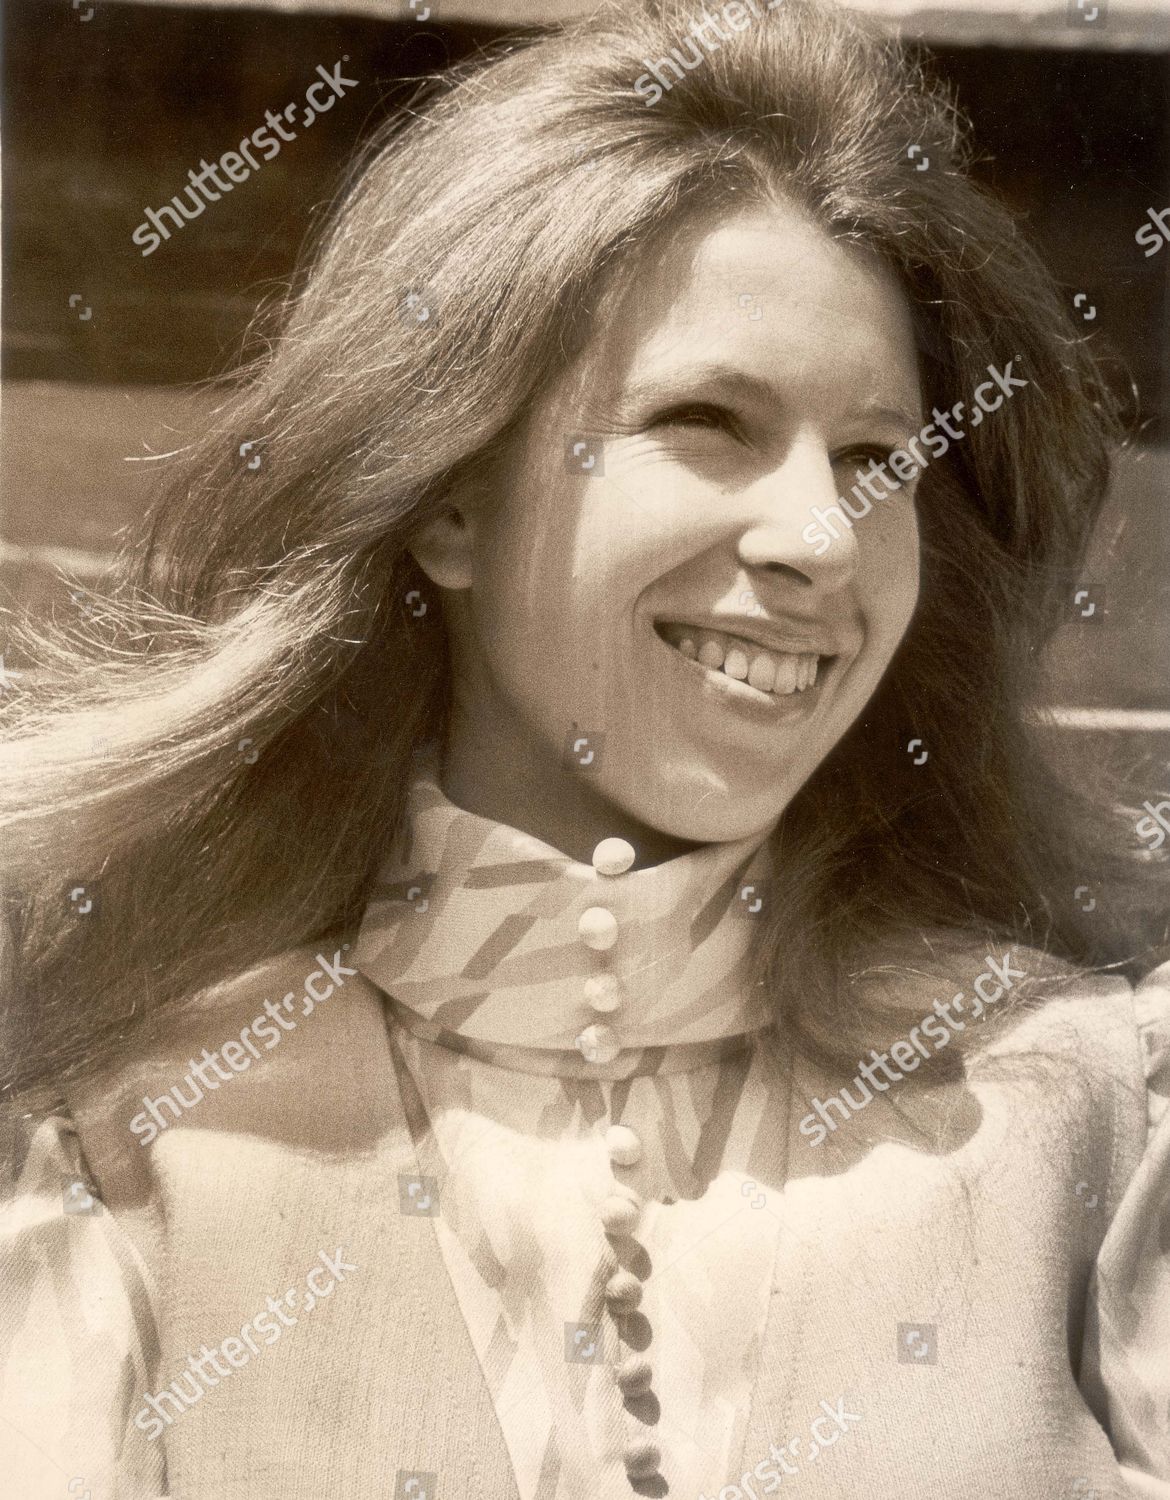 princess-anne-now-princess-royal-1971-picture-shows-princess-anne-during-her-visit-to-norway-shutterstock-editorial-892341a.jpg